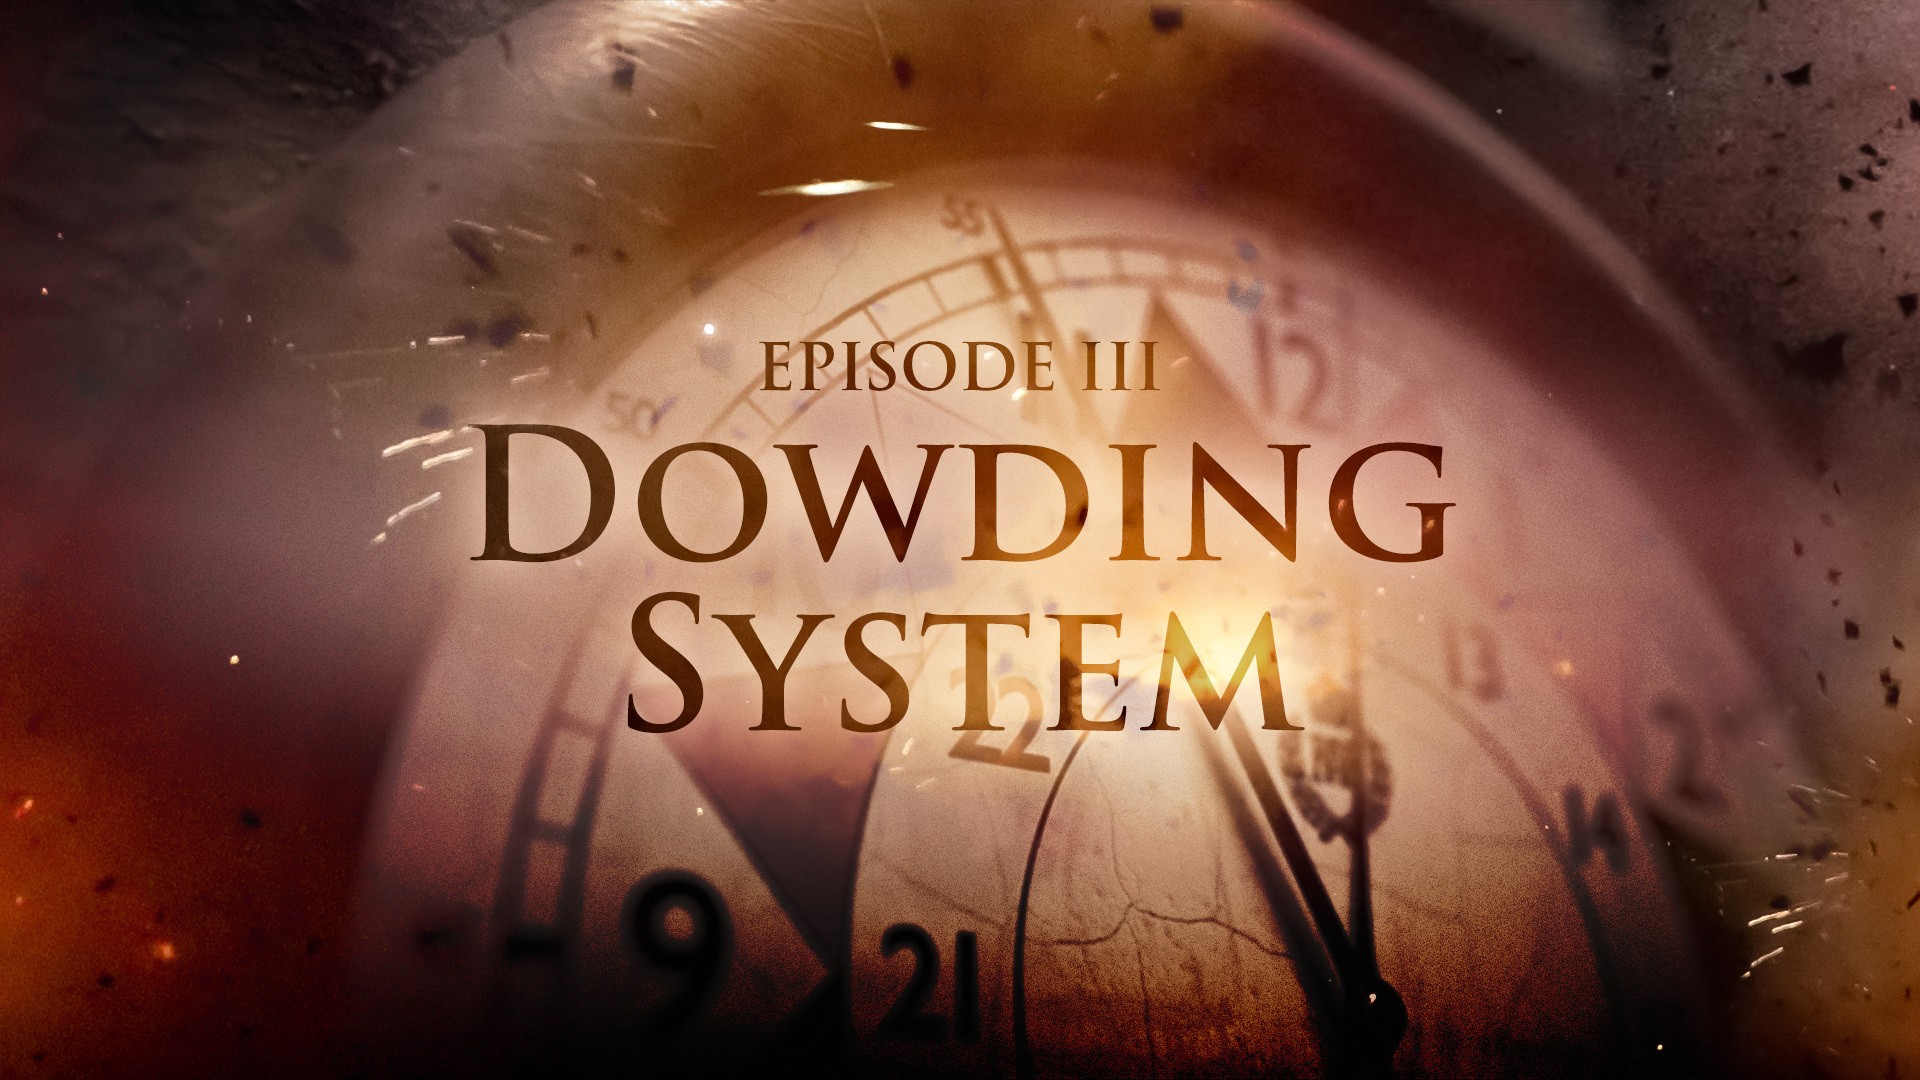 Battle of Britain Ep. 3 — The Dowding System